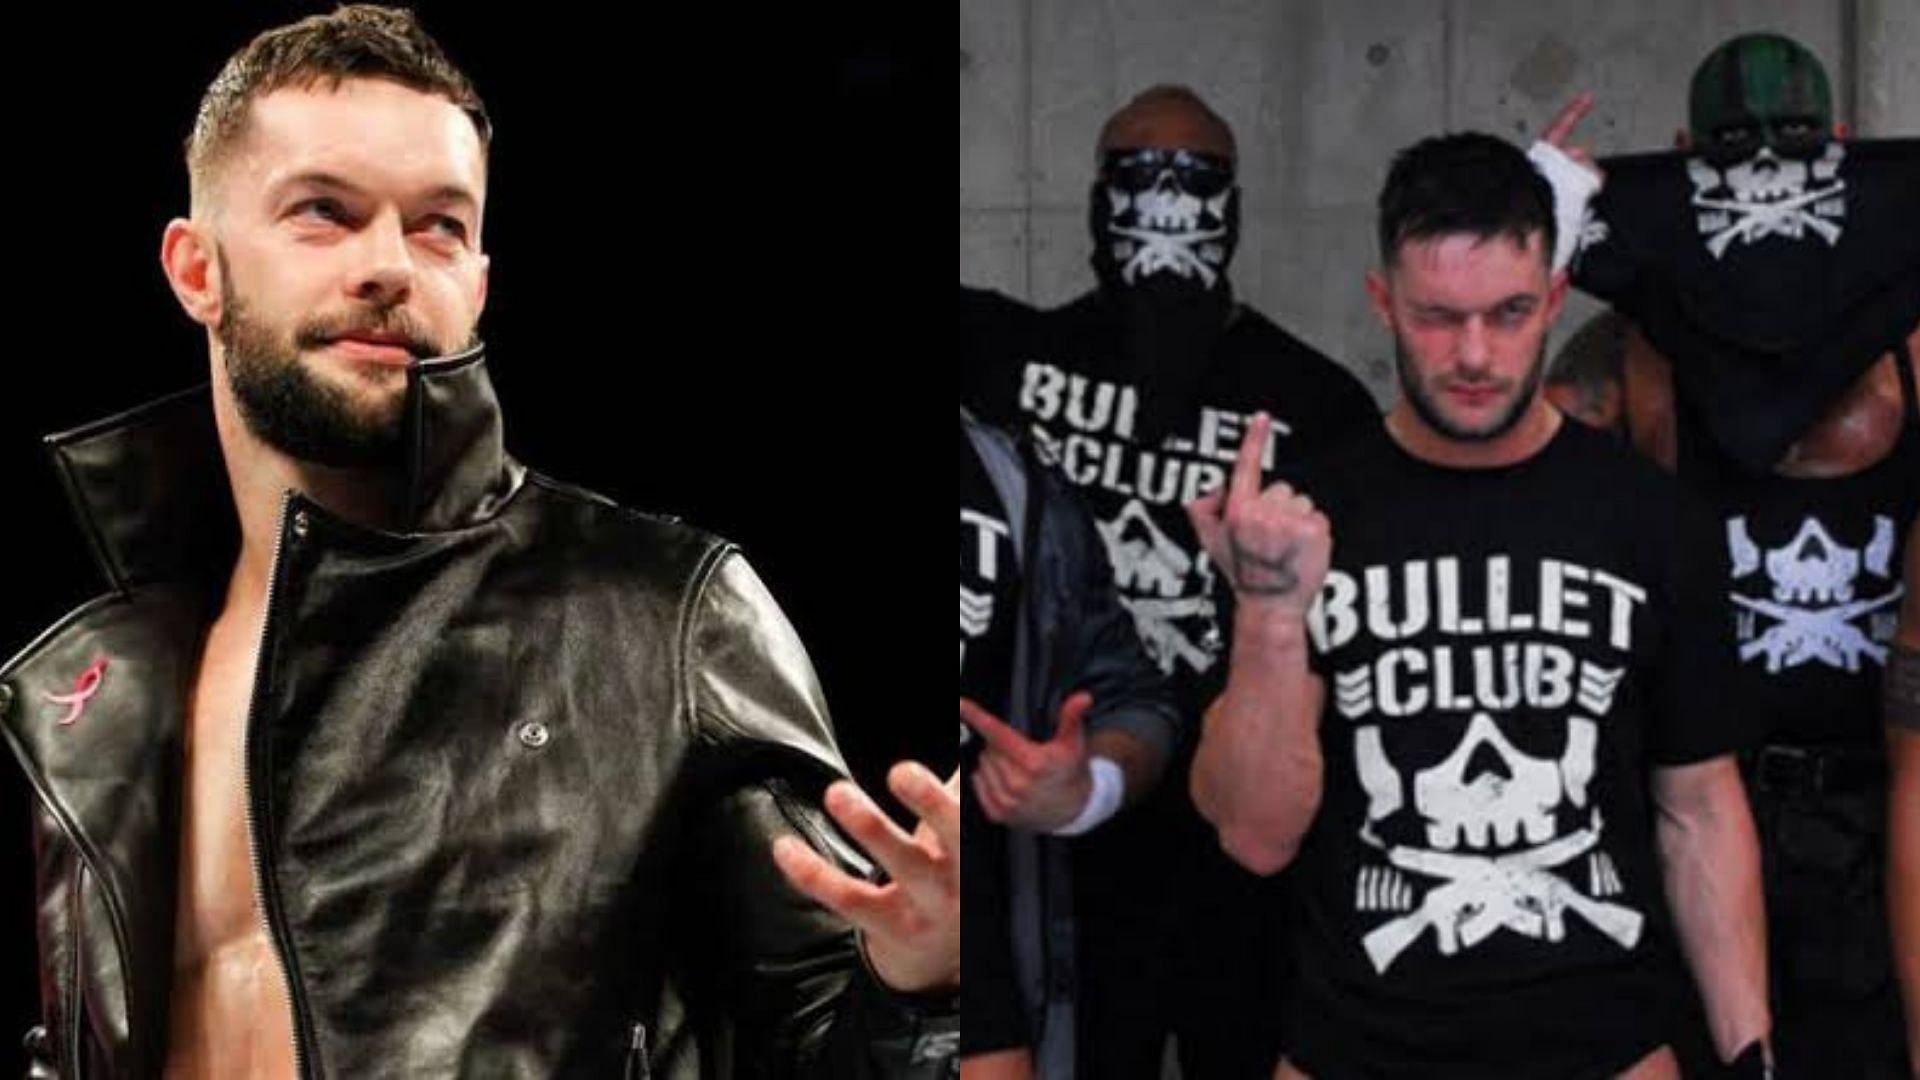 Finn Balor is the founder and former leader of the Bullet Club